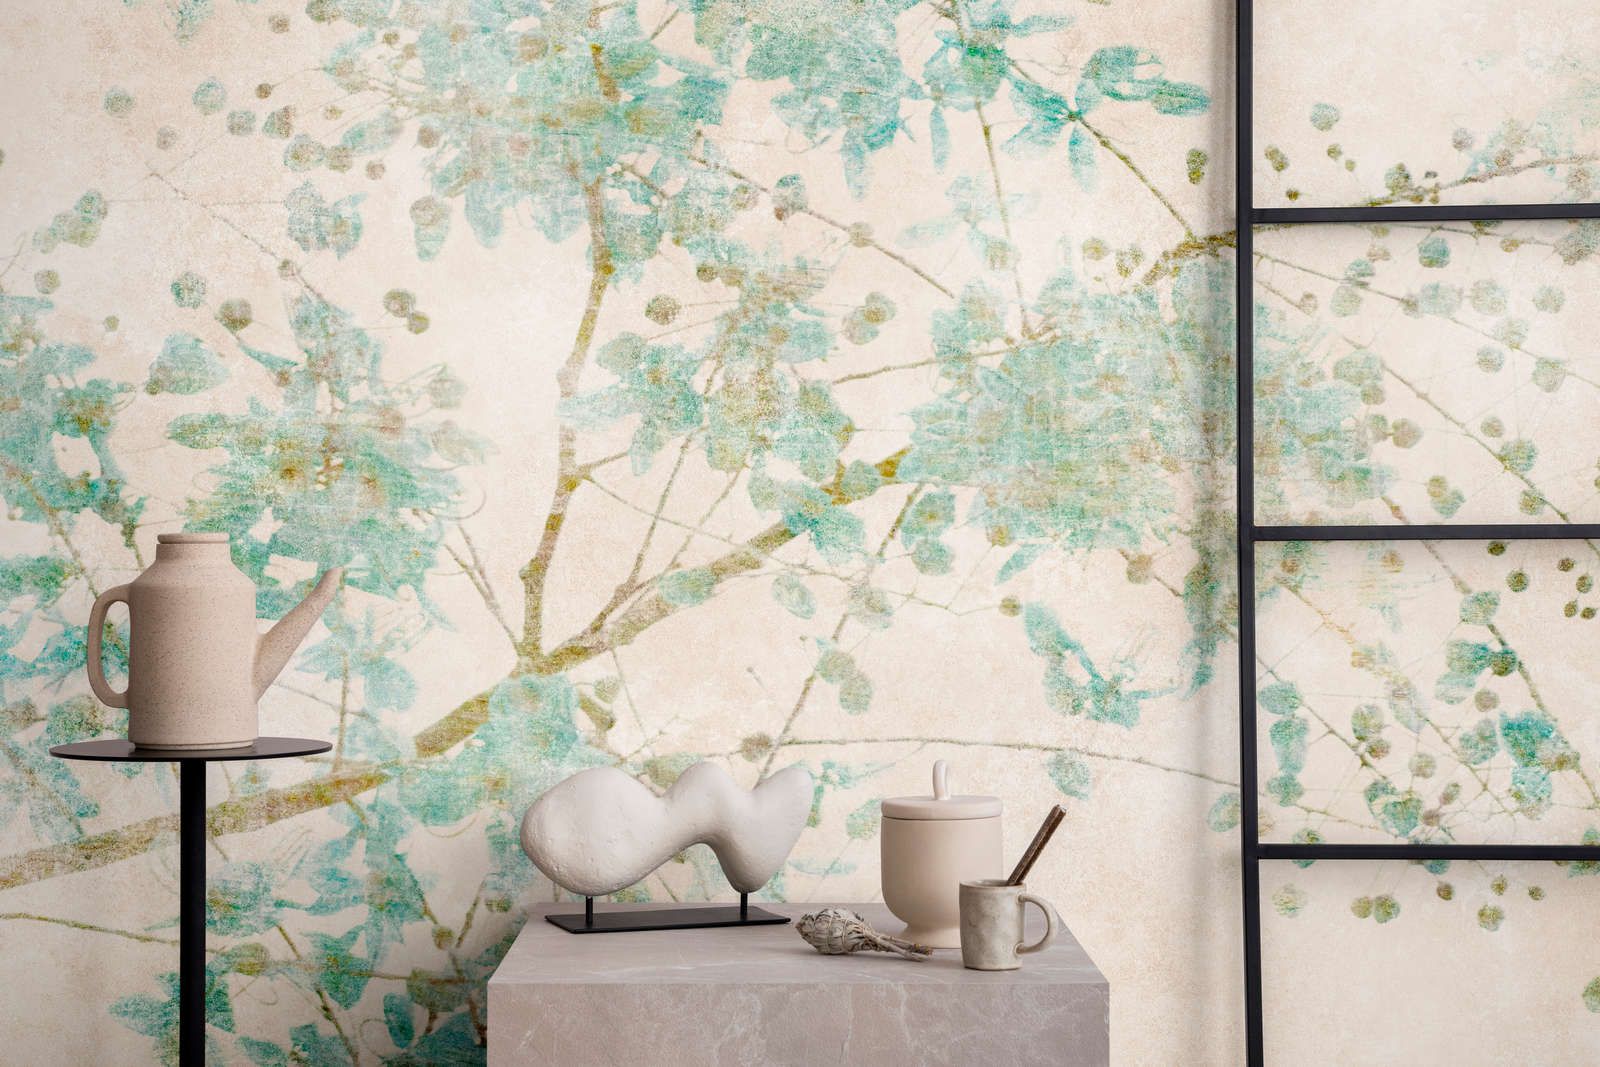             Photo wallpaper »nikko« - Branches in pale colours with vintage plaster texture in the background - Smooth, slightly shiny premium non-woven fabric
        